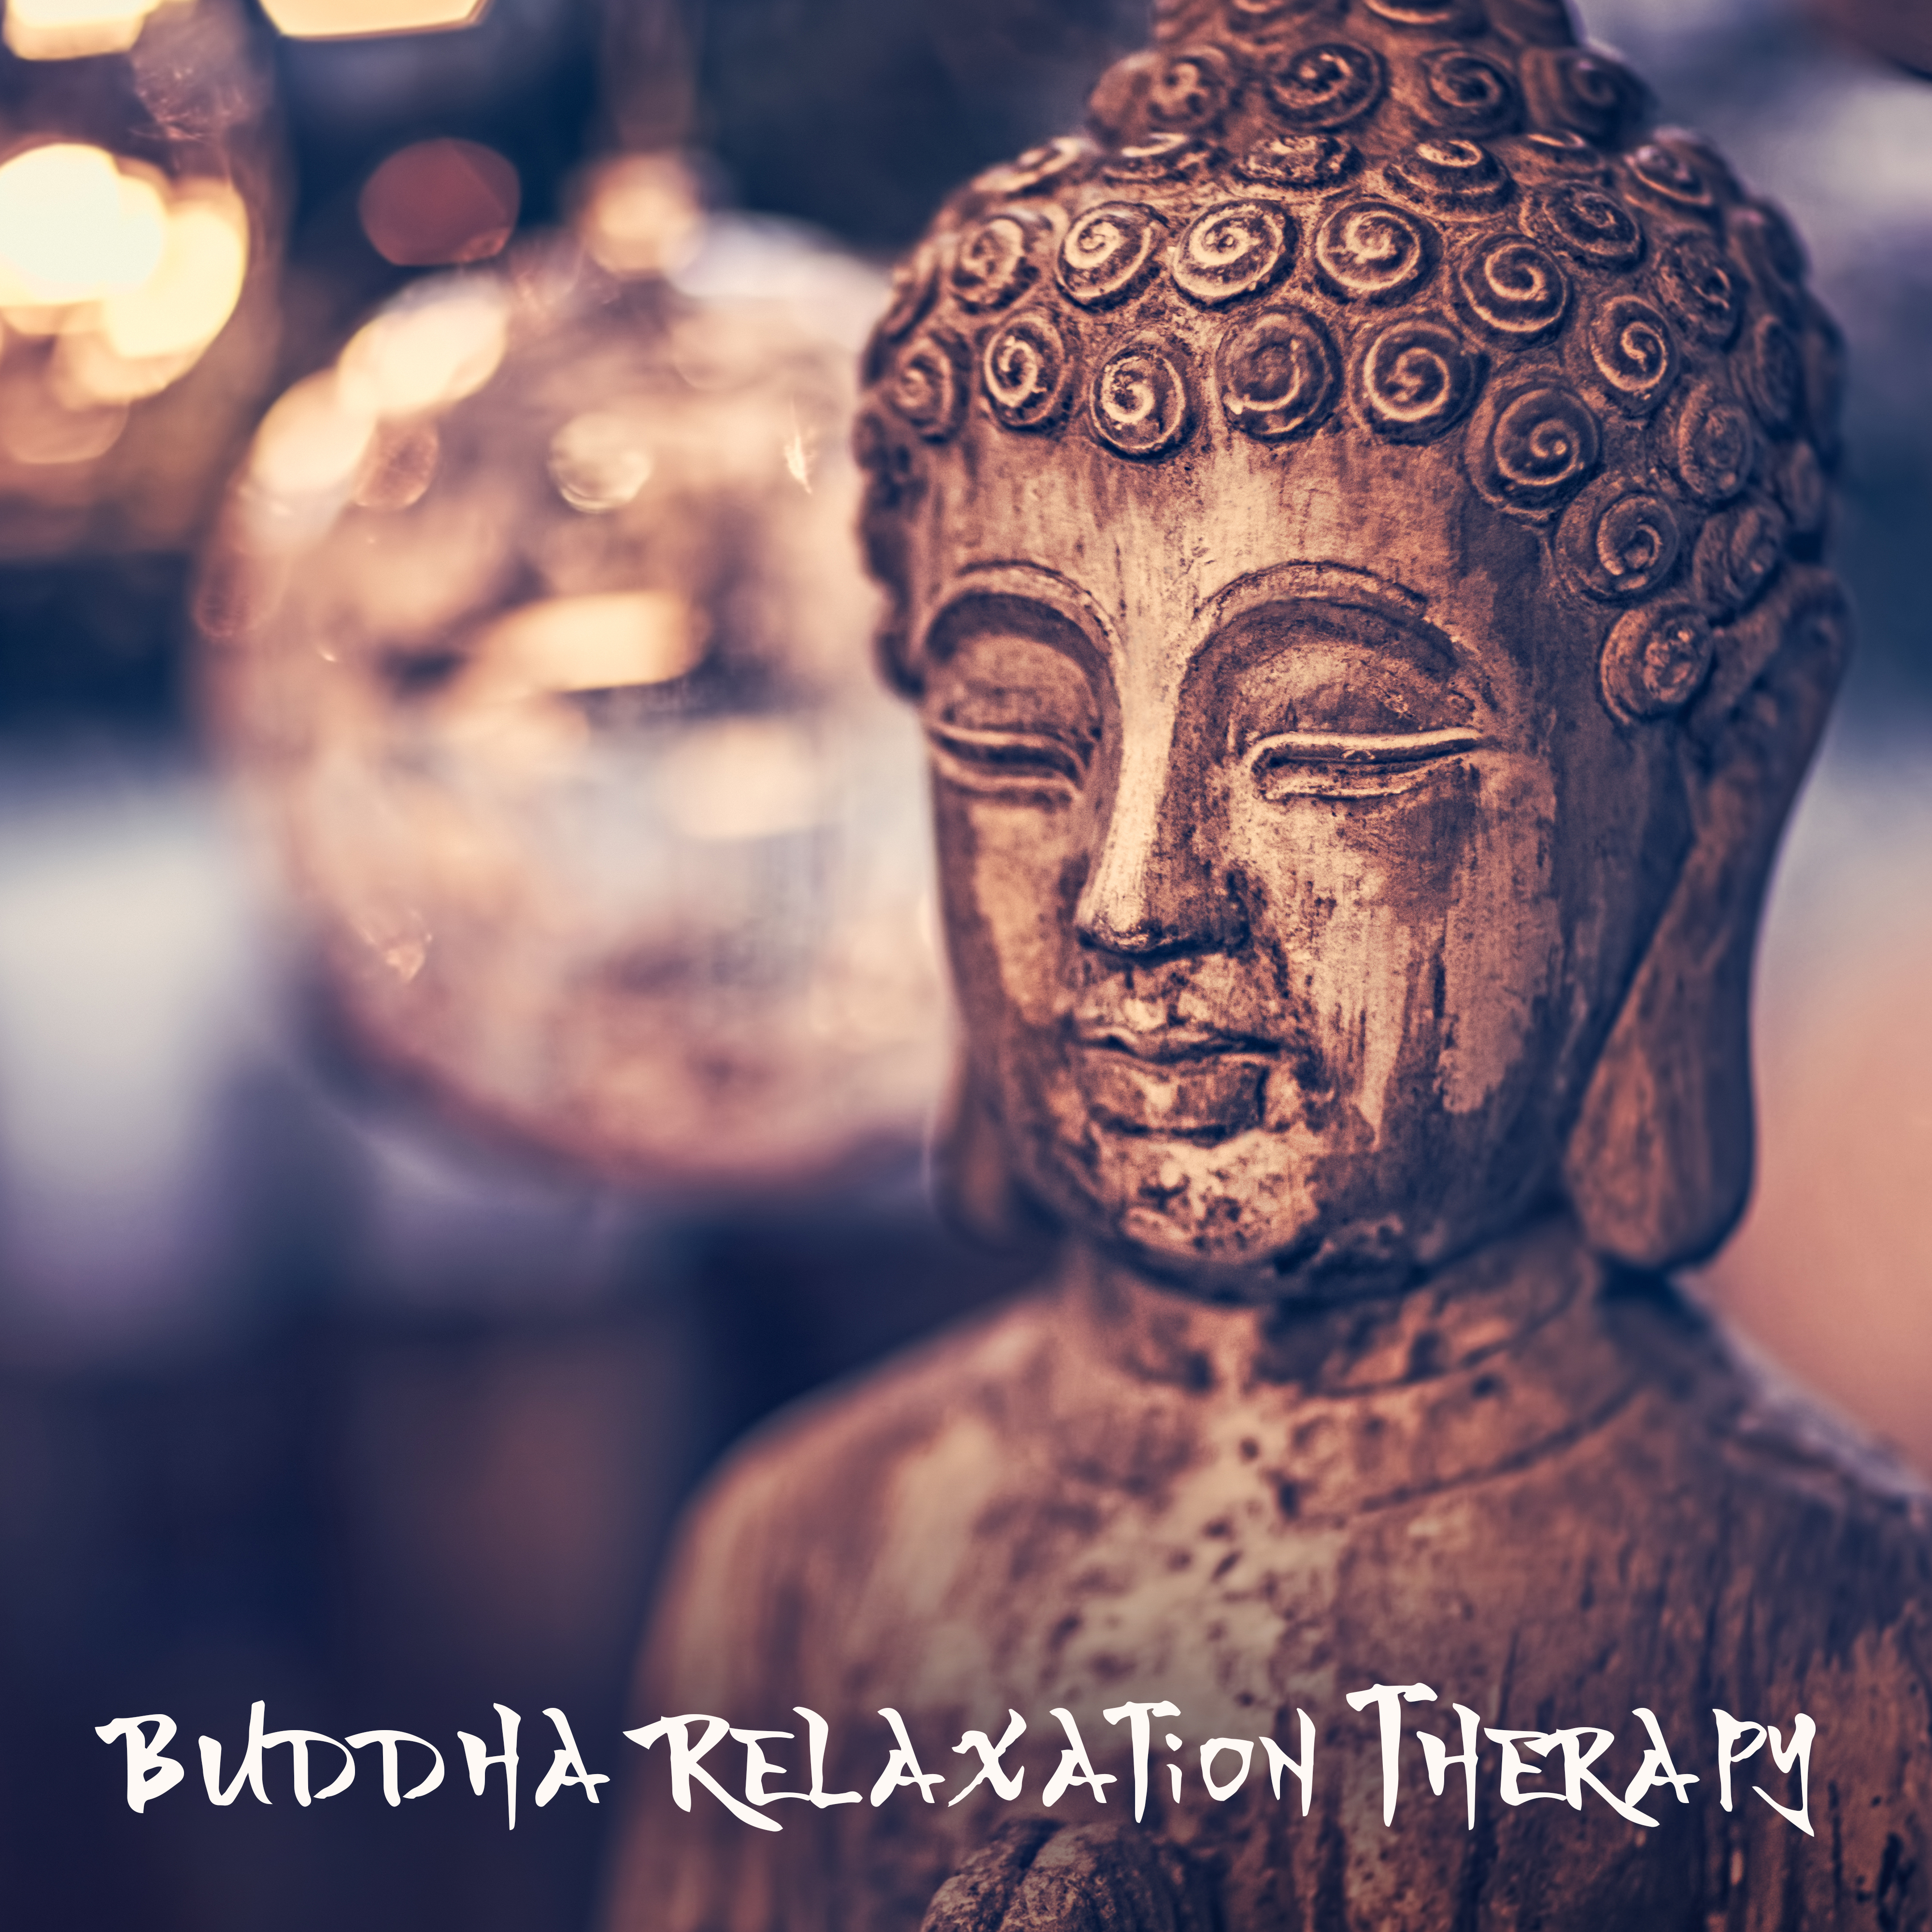 Buddha Relaxation Therapy